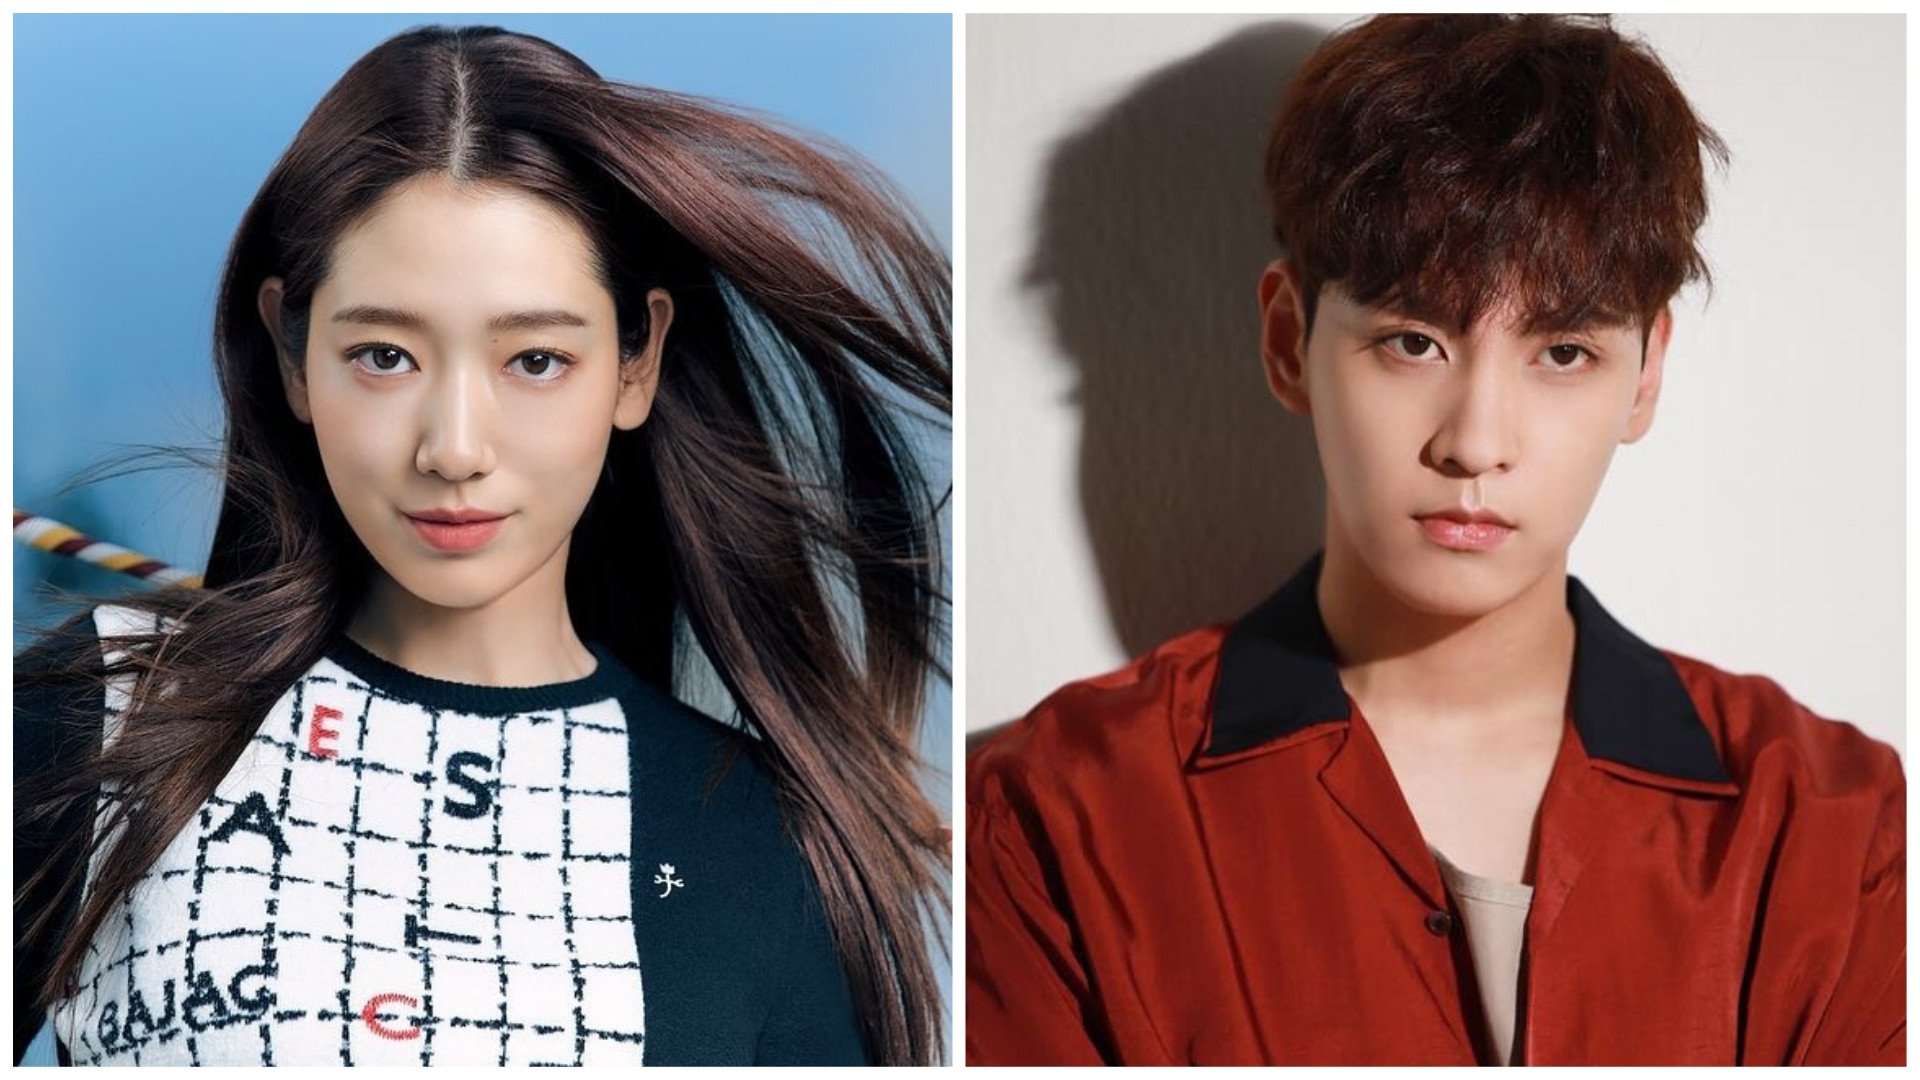 Park Shin-hye and Choi Tae-joon are getting married and having a